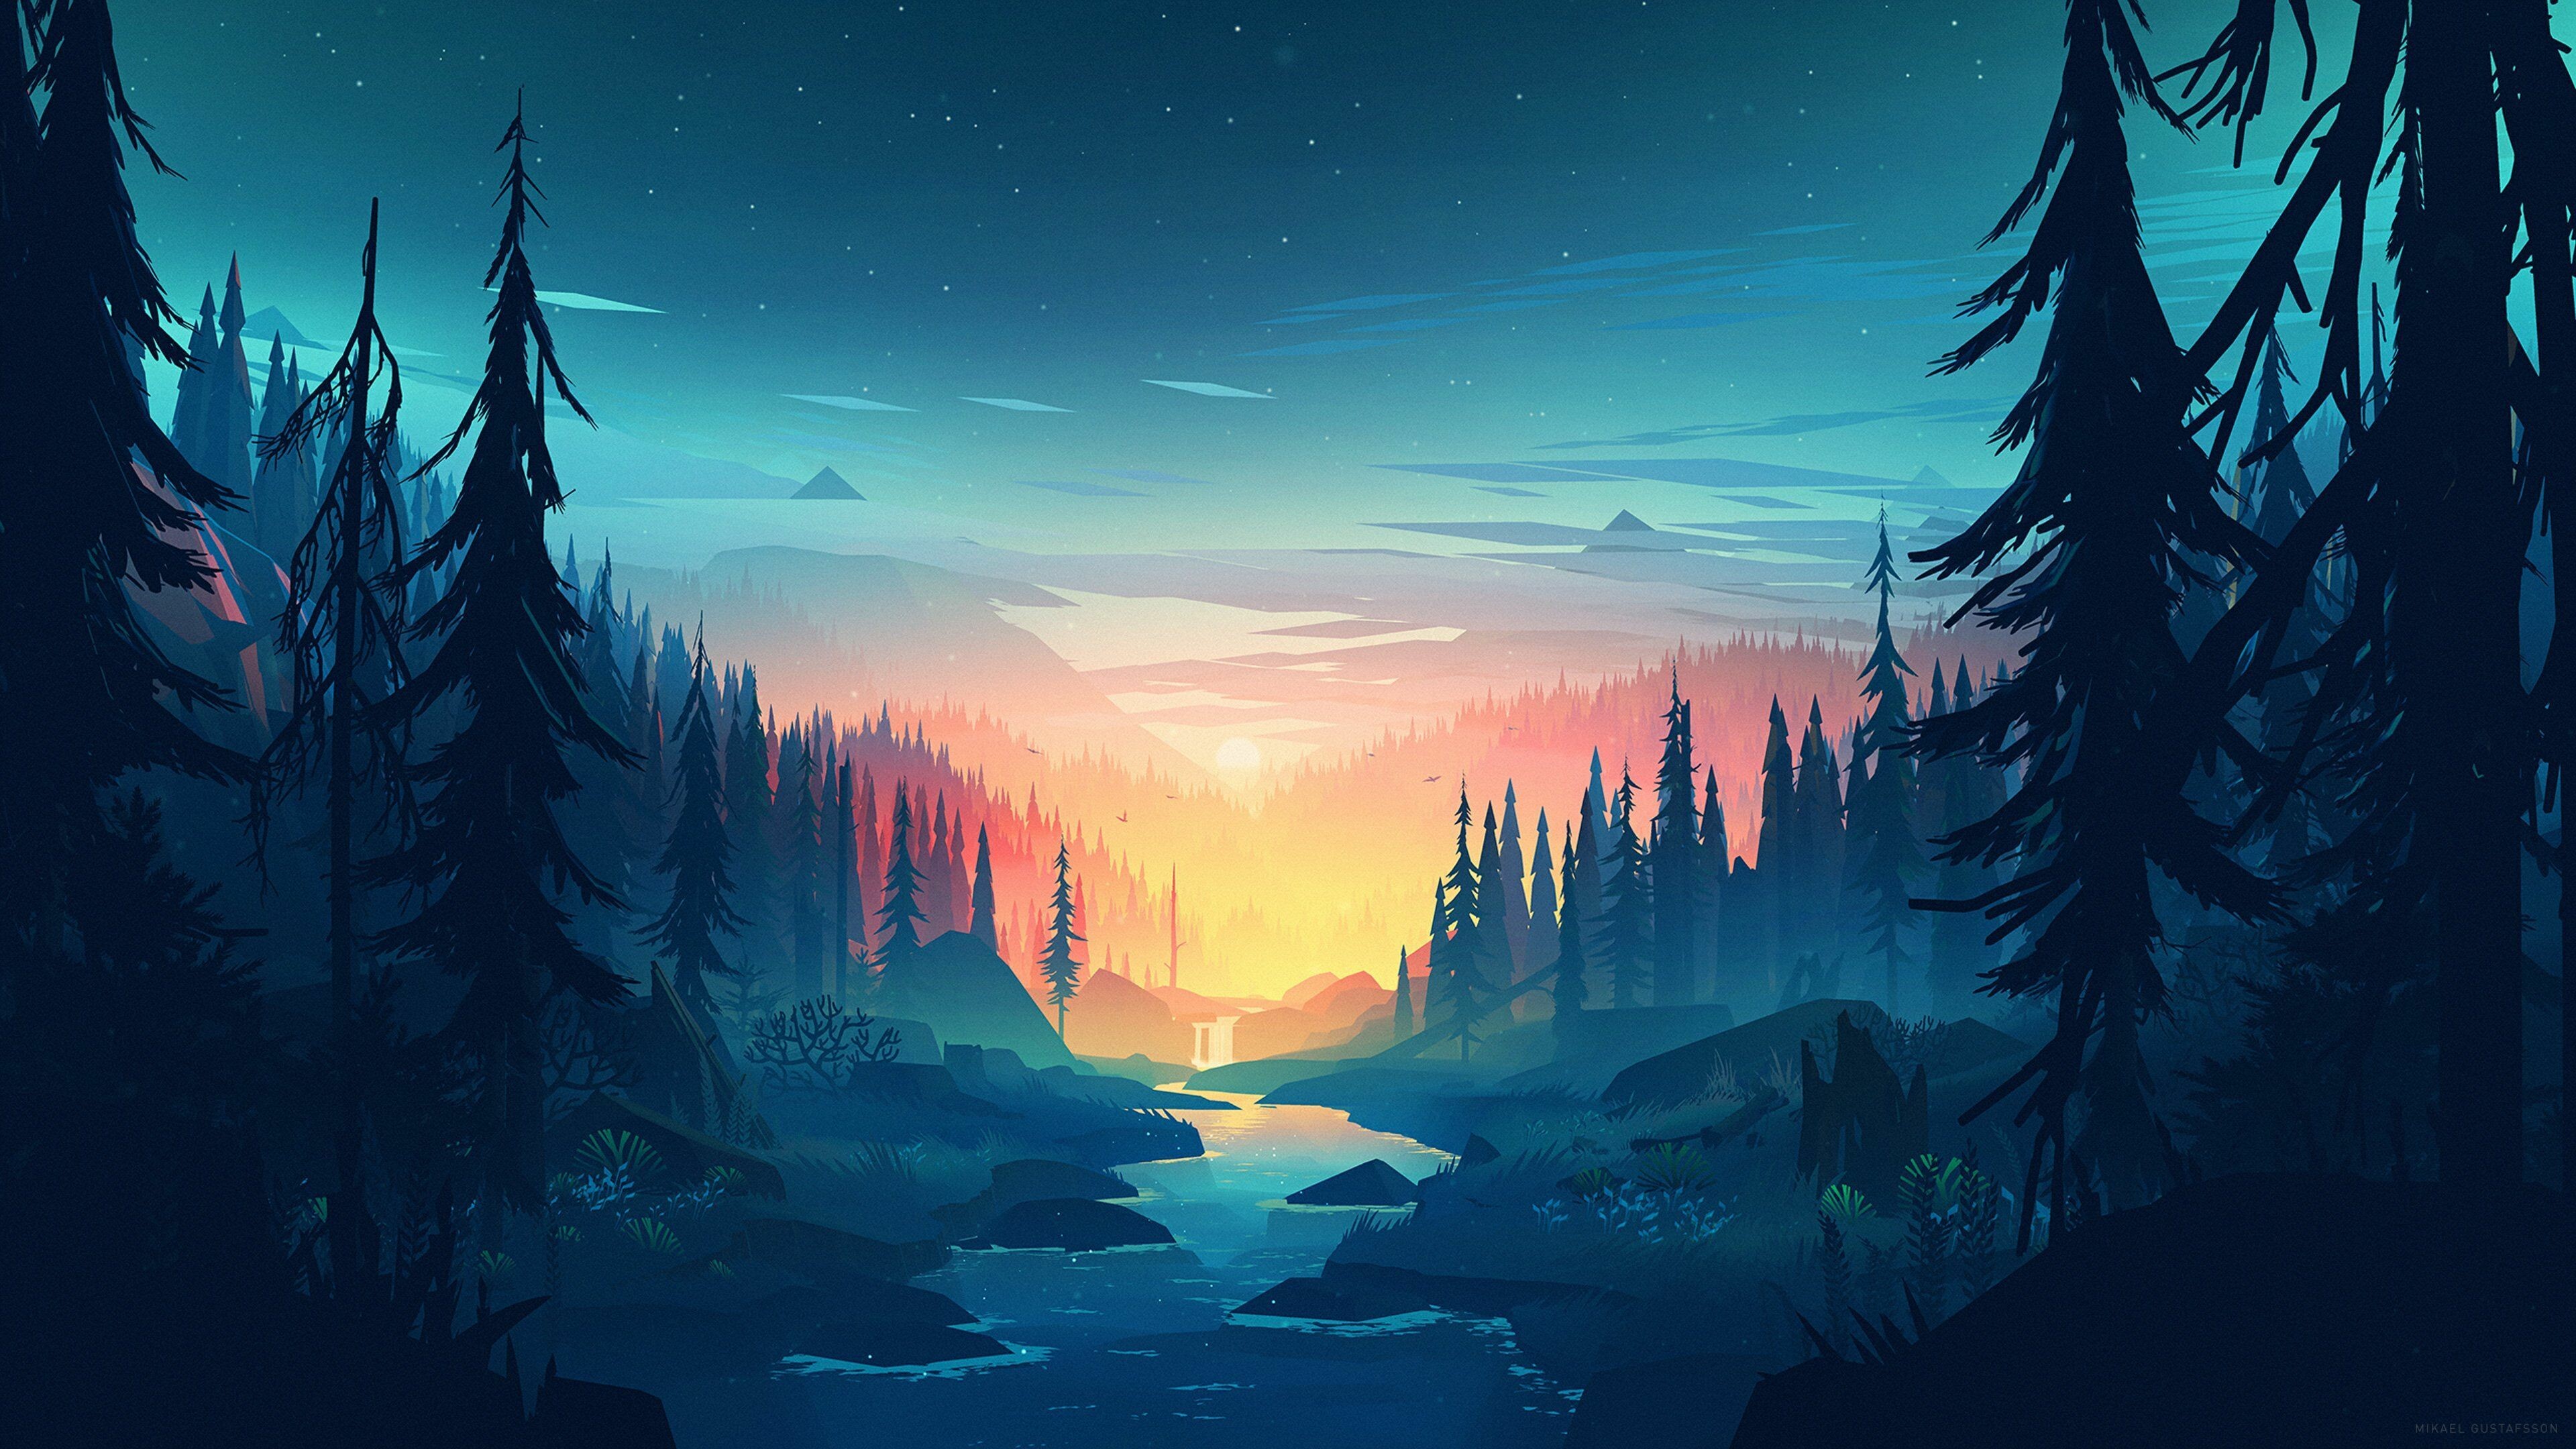 Firewatch: The game's environment was modeled by Ng, based on a single painting by Moss. 3840x2160 4K Wallpaper.